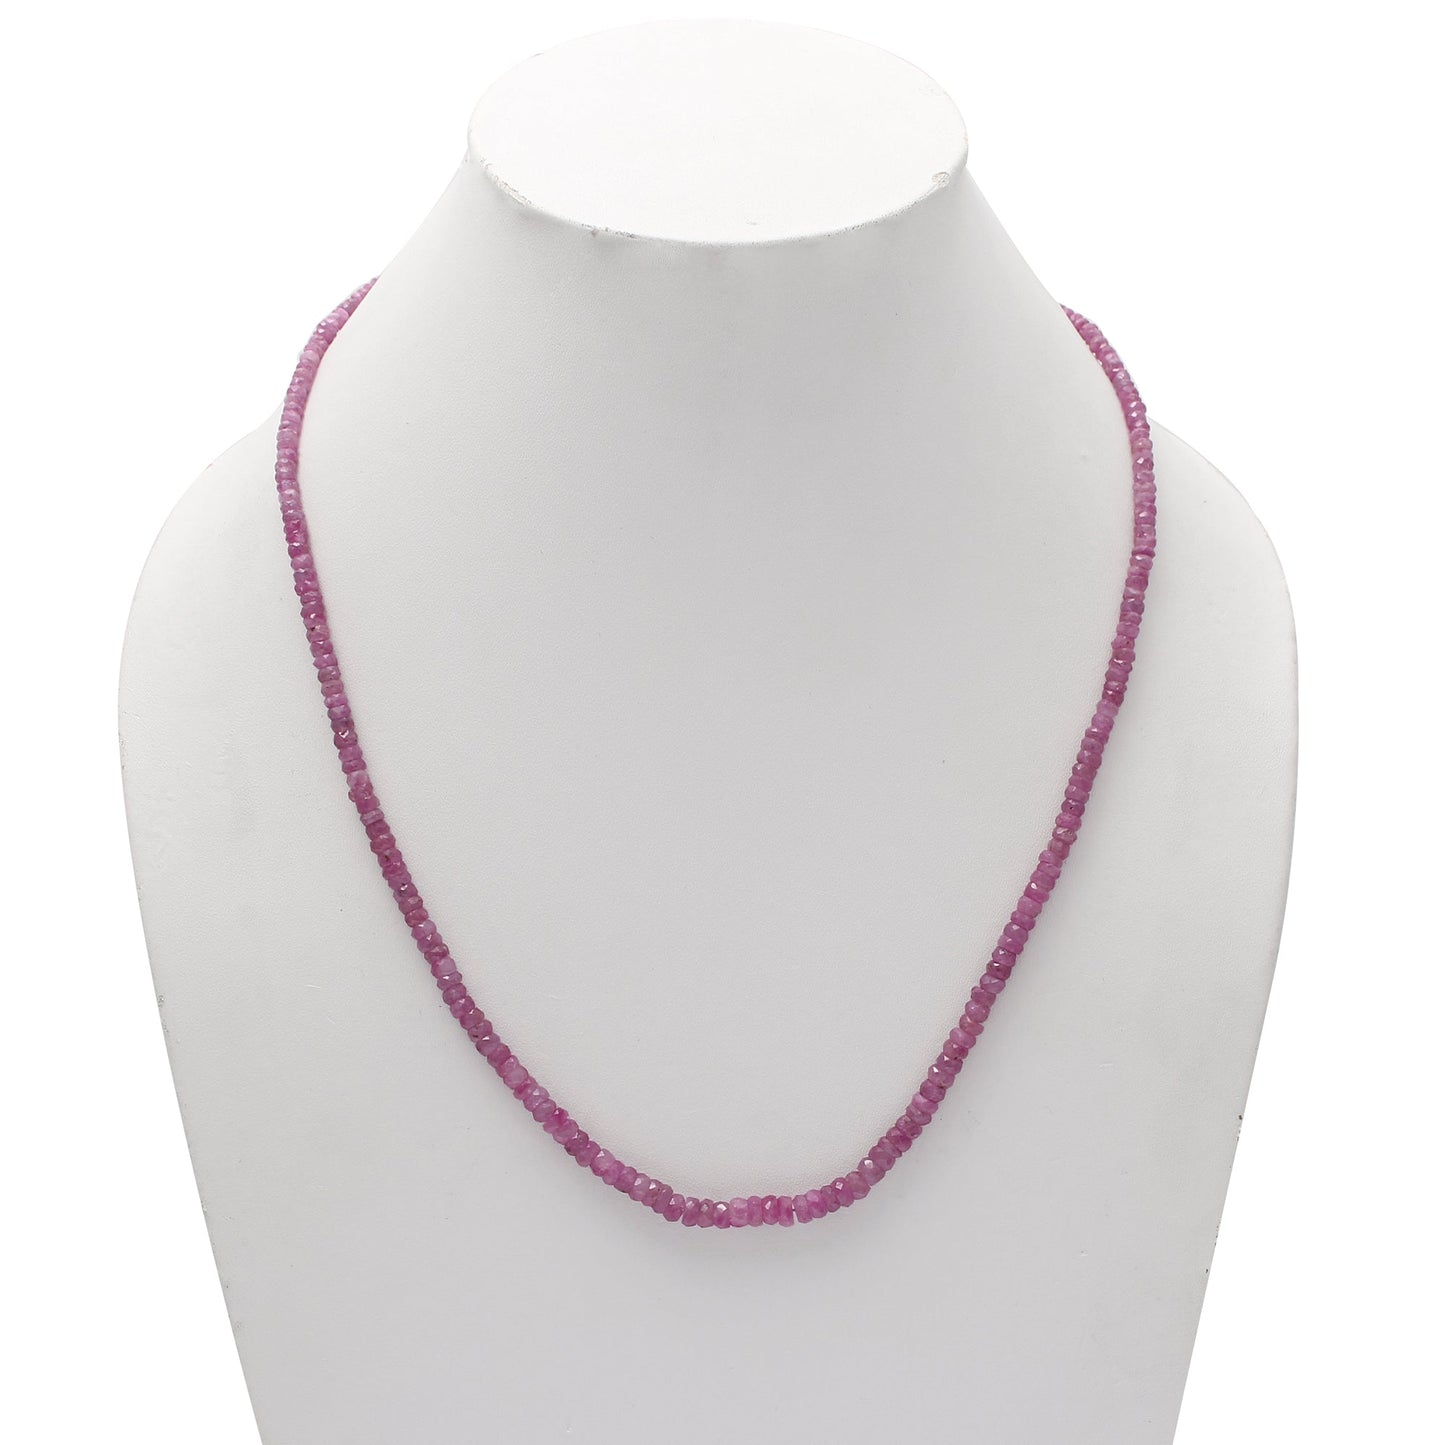 Dainty Ruby Necklace, Beaded Handmade Necklace, Birthday Gift For Wife GemsRush